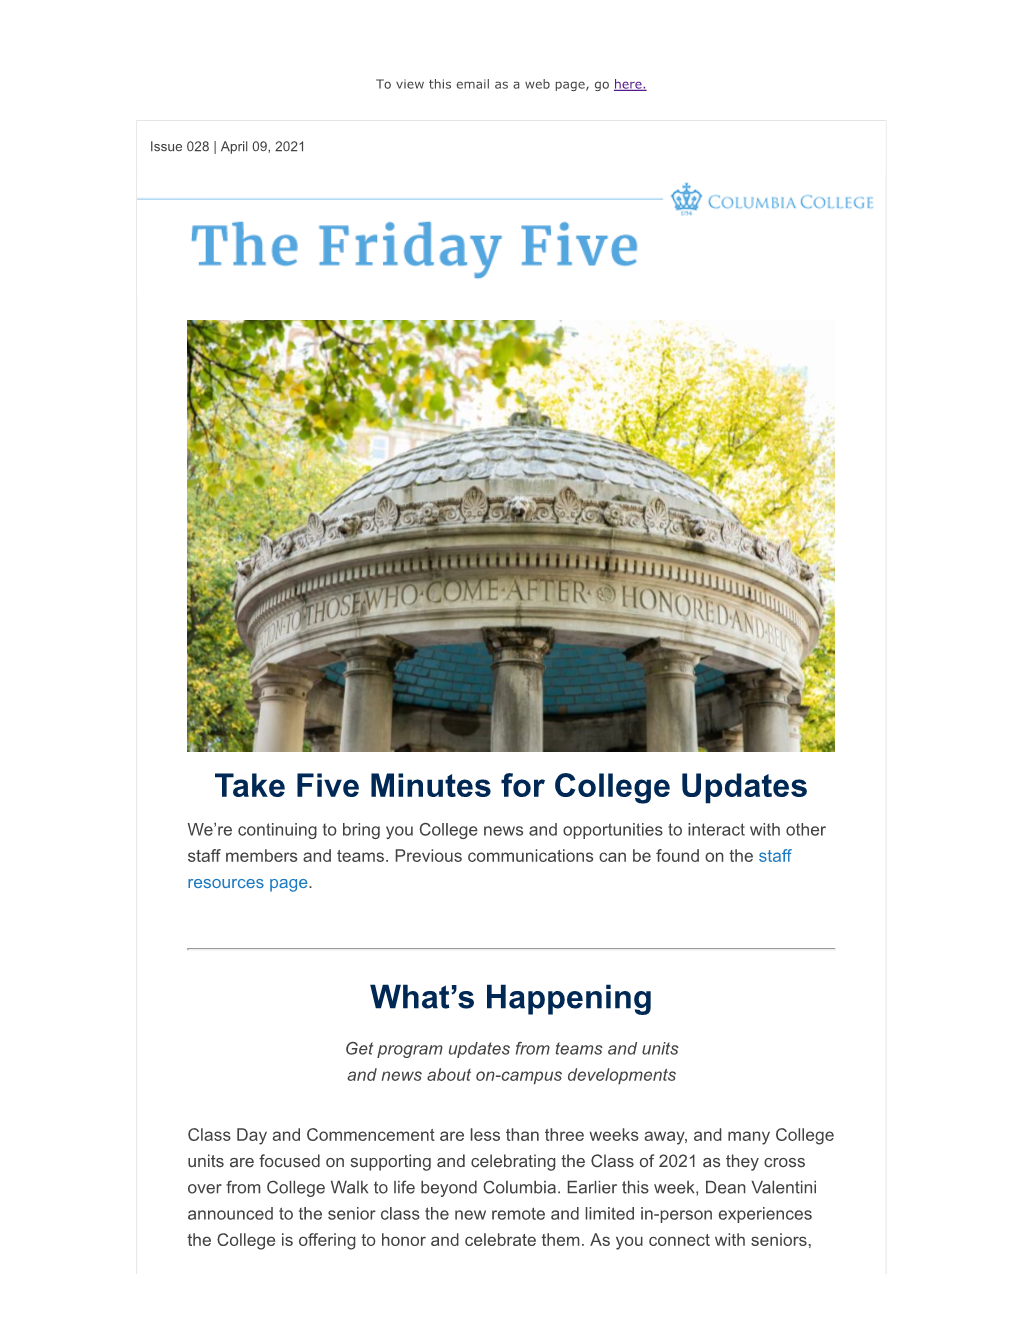 Take Five Minutes for College Updates What's Happening